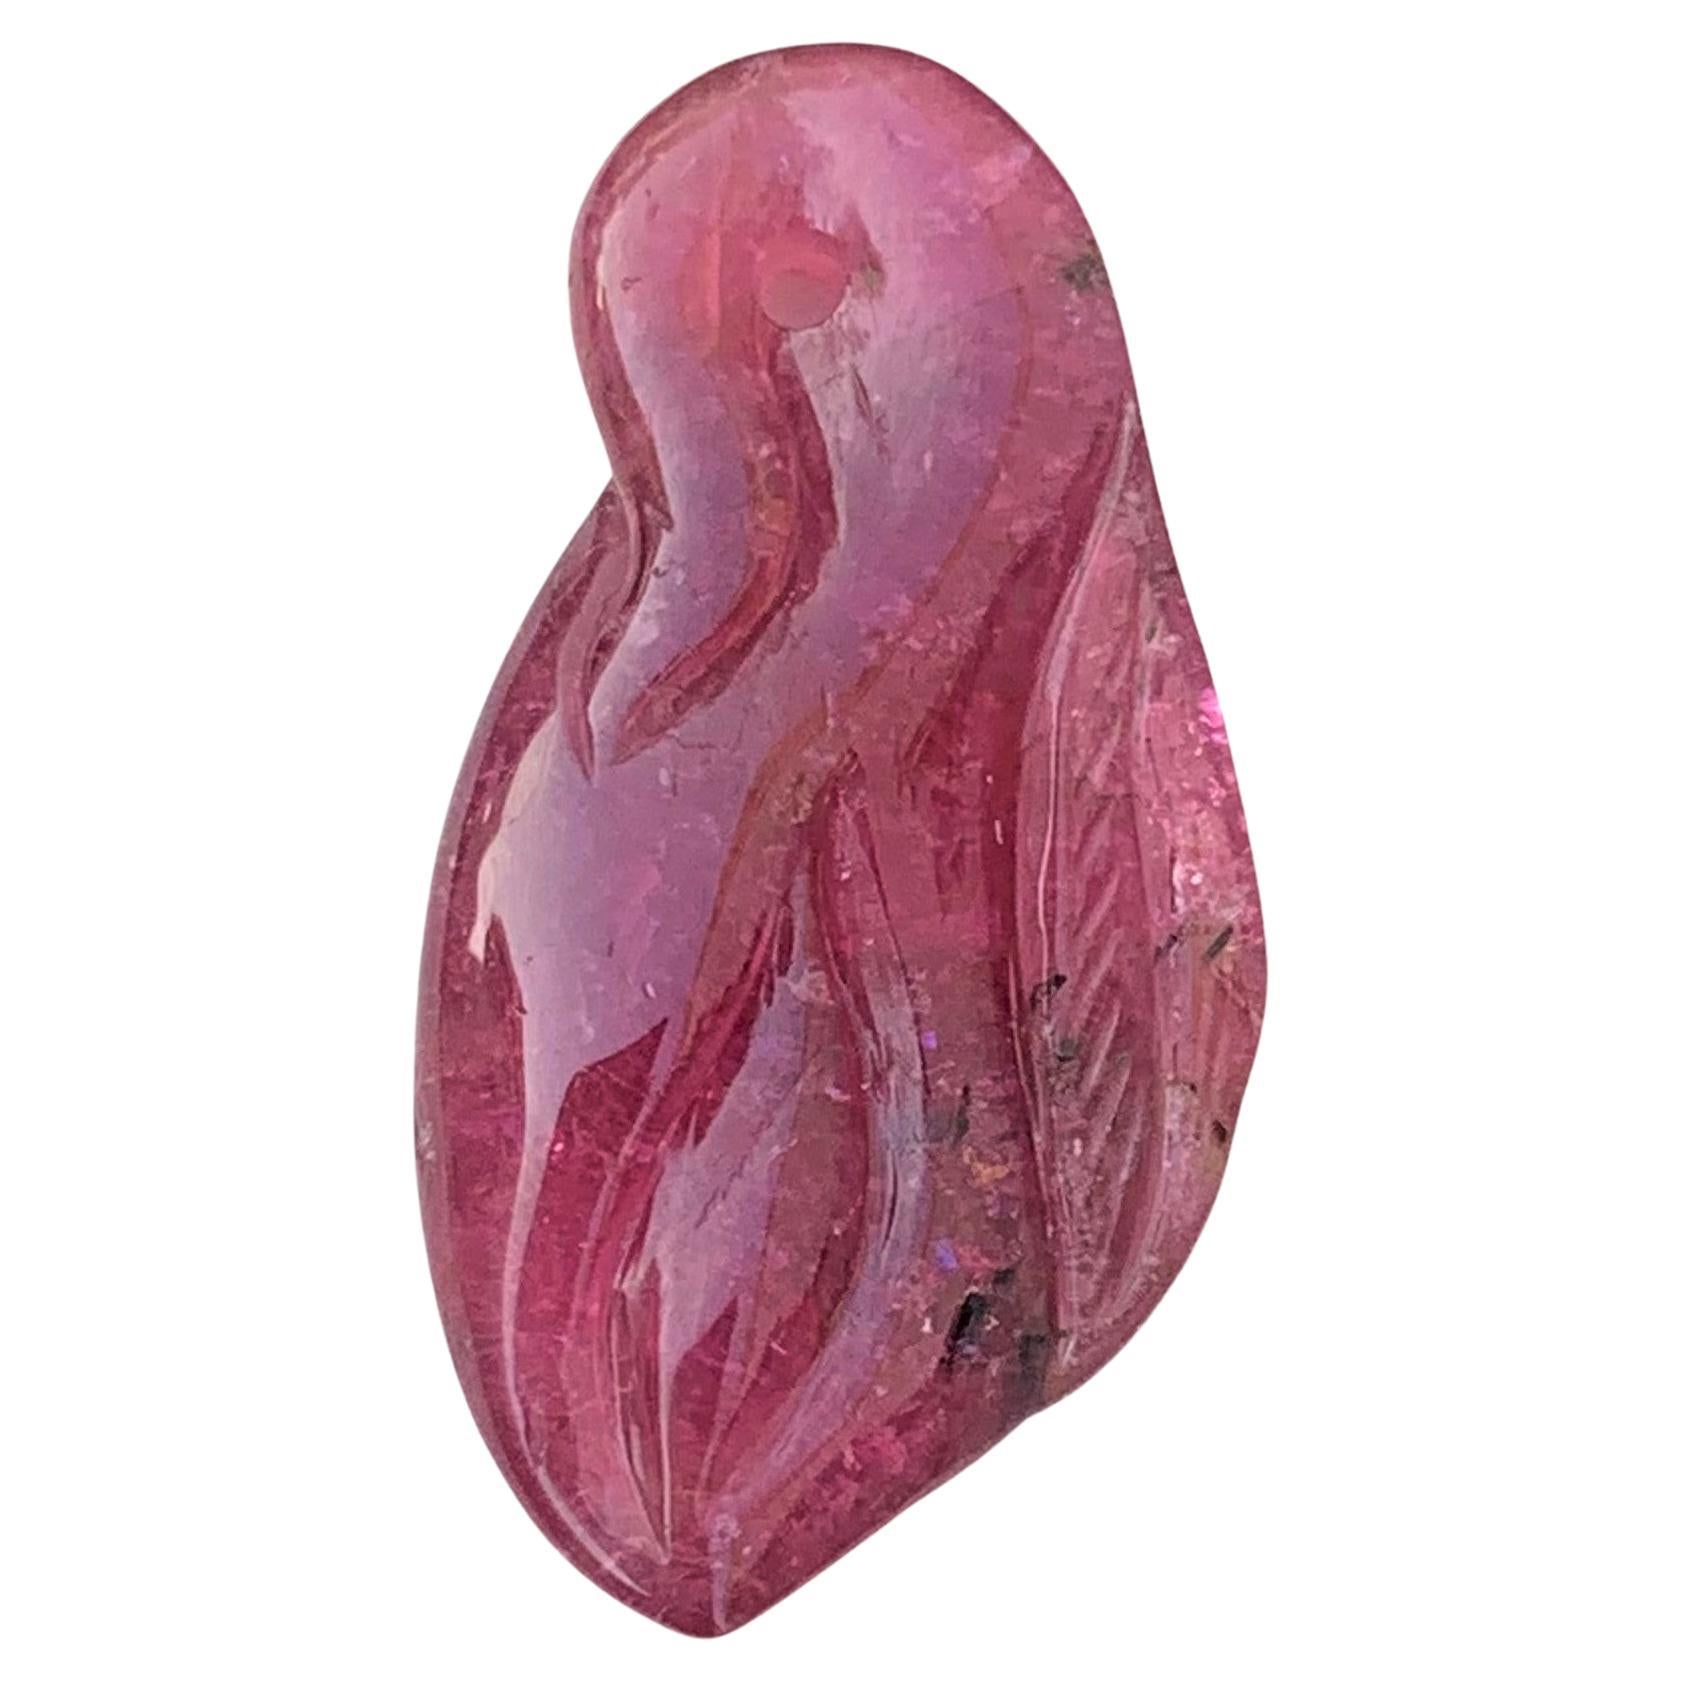 13.70 Carat Glamorous Rubellite Tourmaline Drilled Craving from Africa For Sale